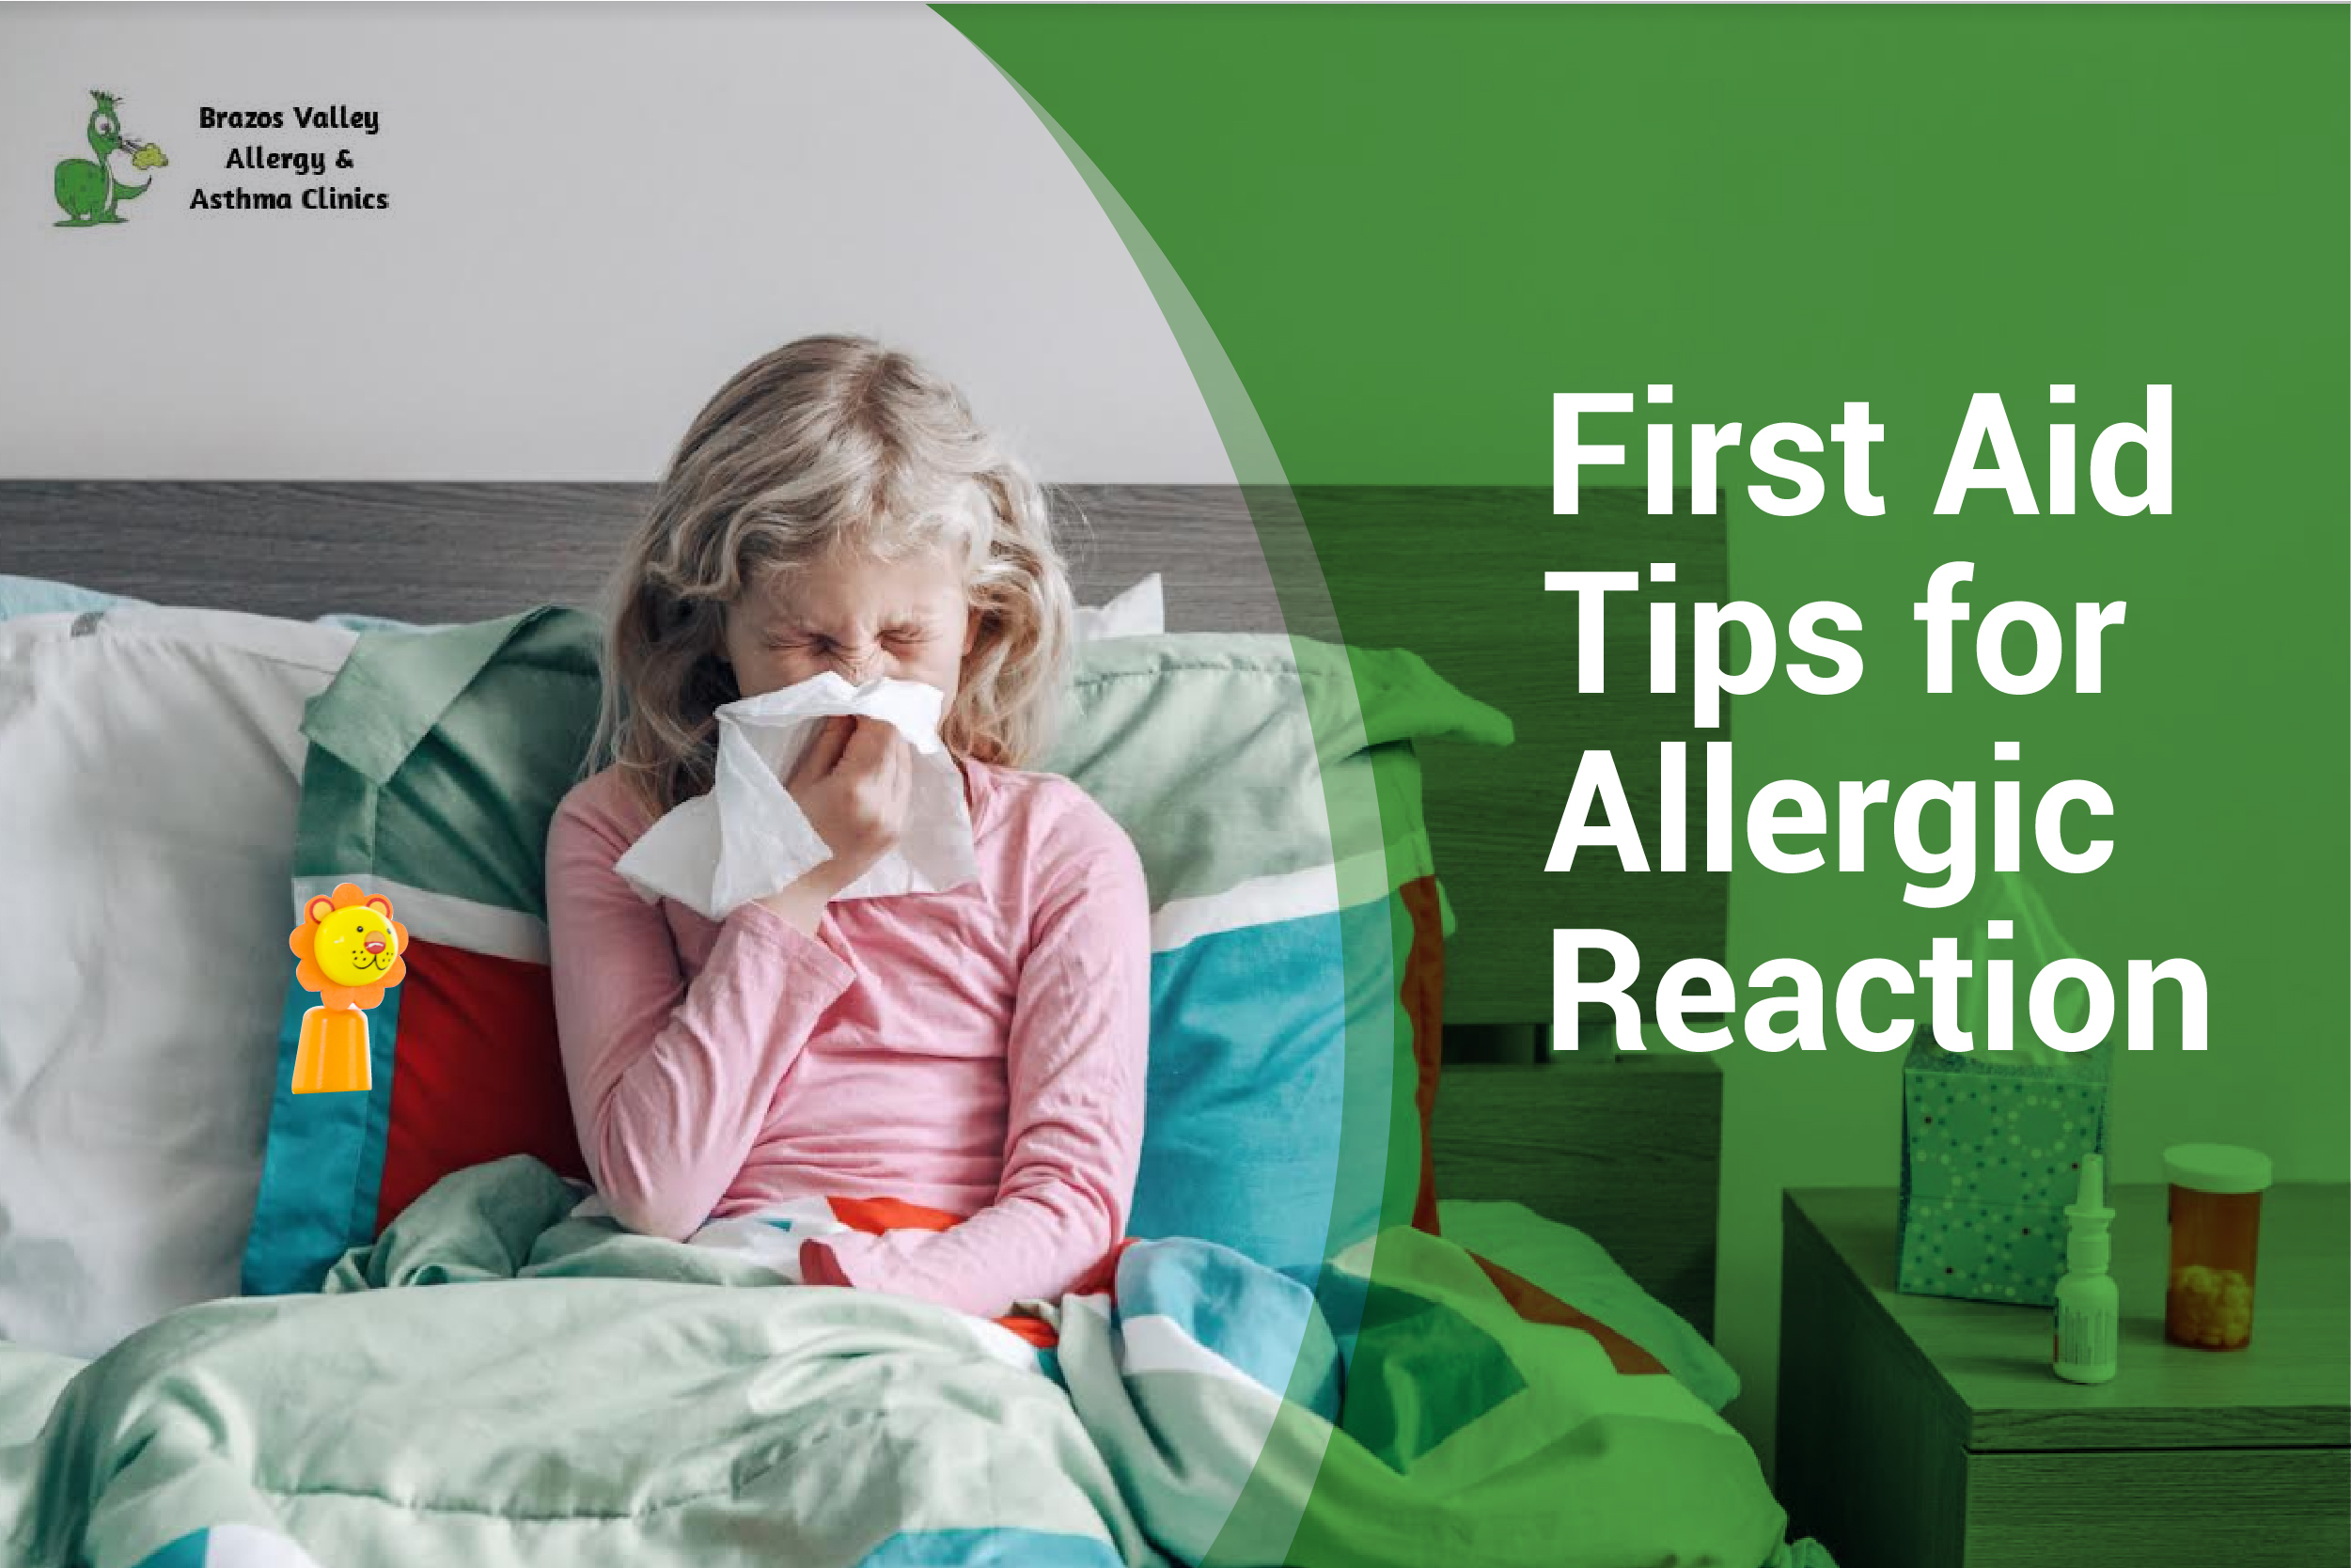 First Aid You Should Know: How to Treat Allergic Reaction